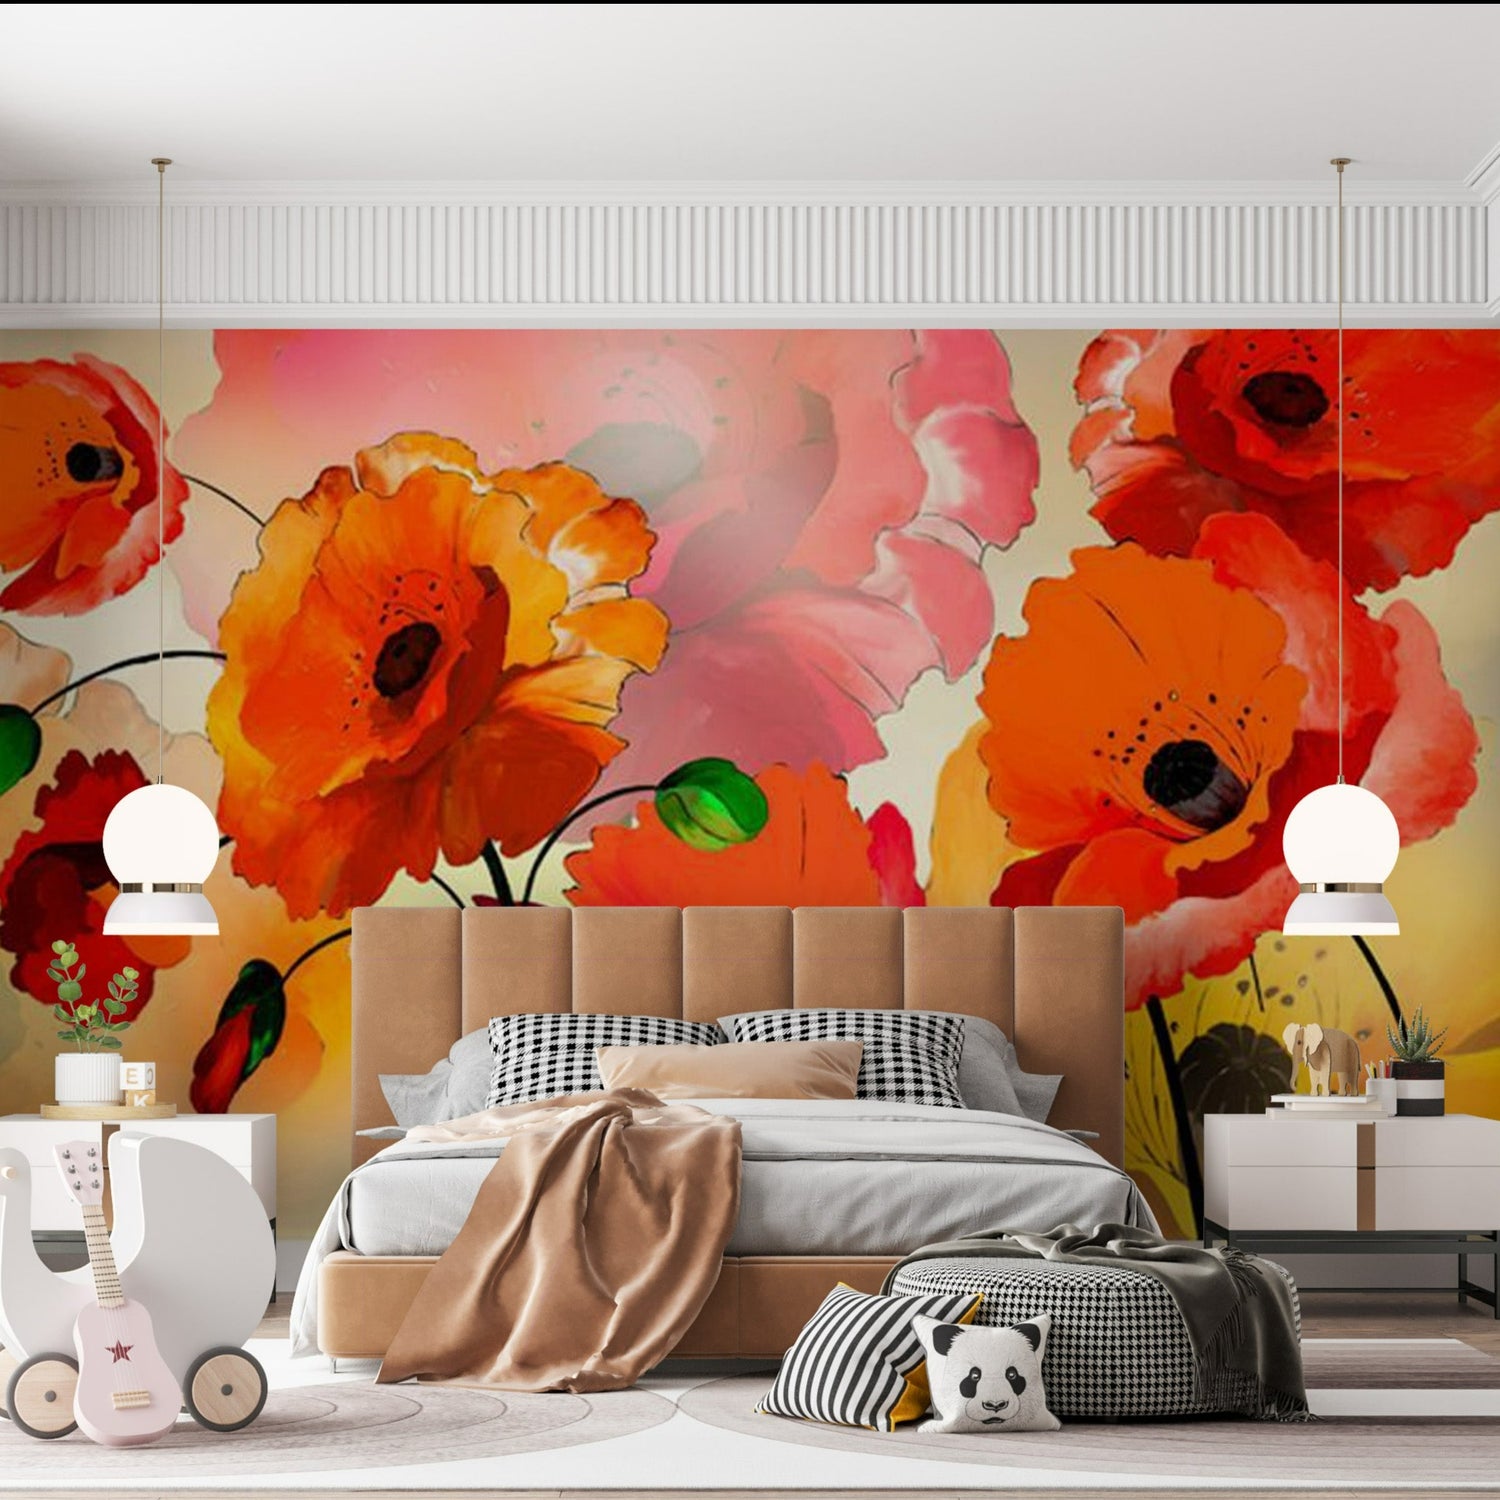 Peel & Stick Floral XXL Wall Mural - Velvet Red Poppies - Removable Wall Decals